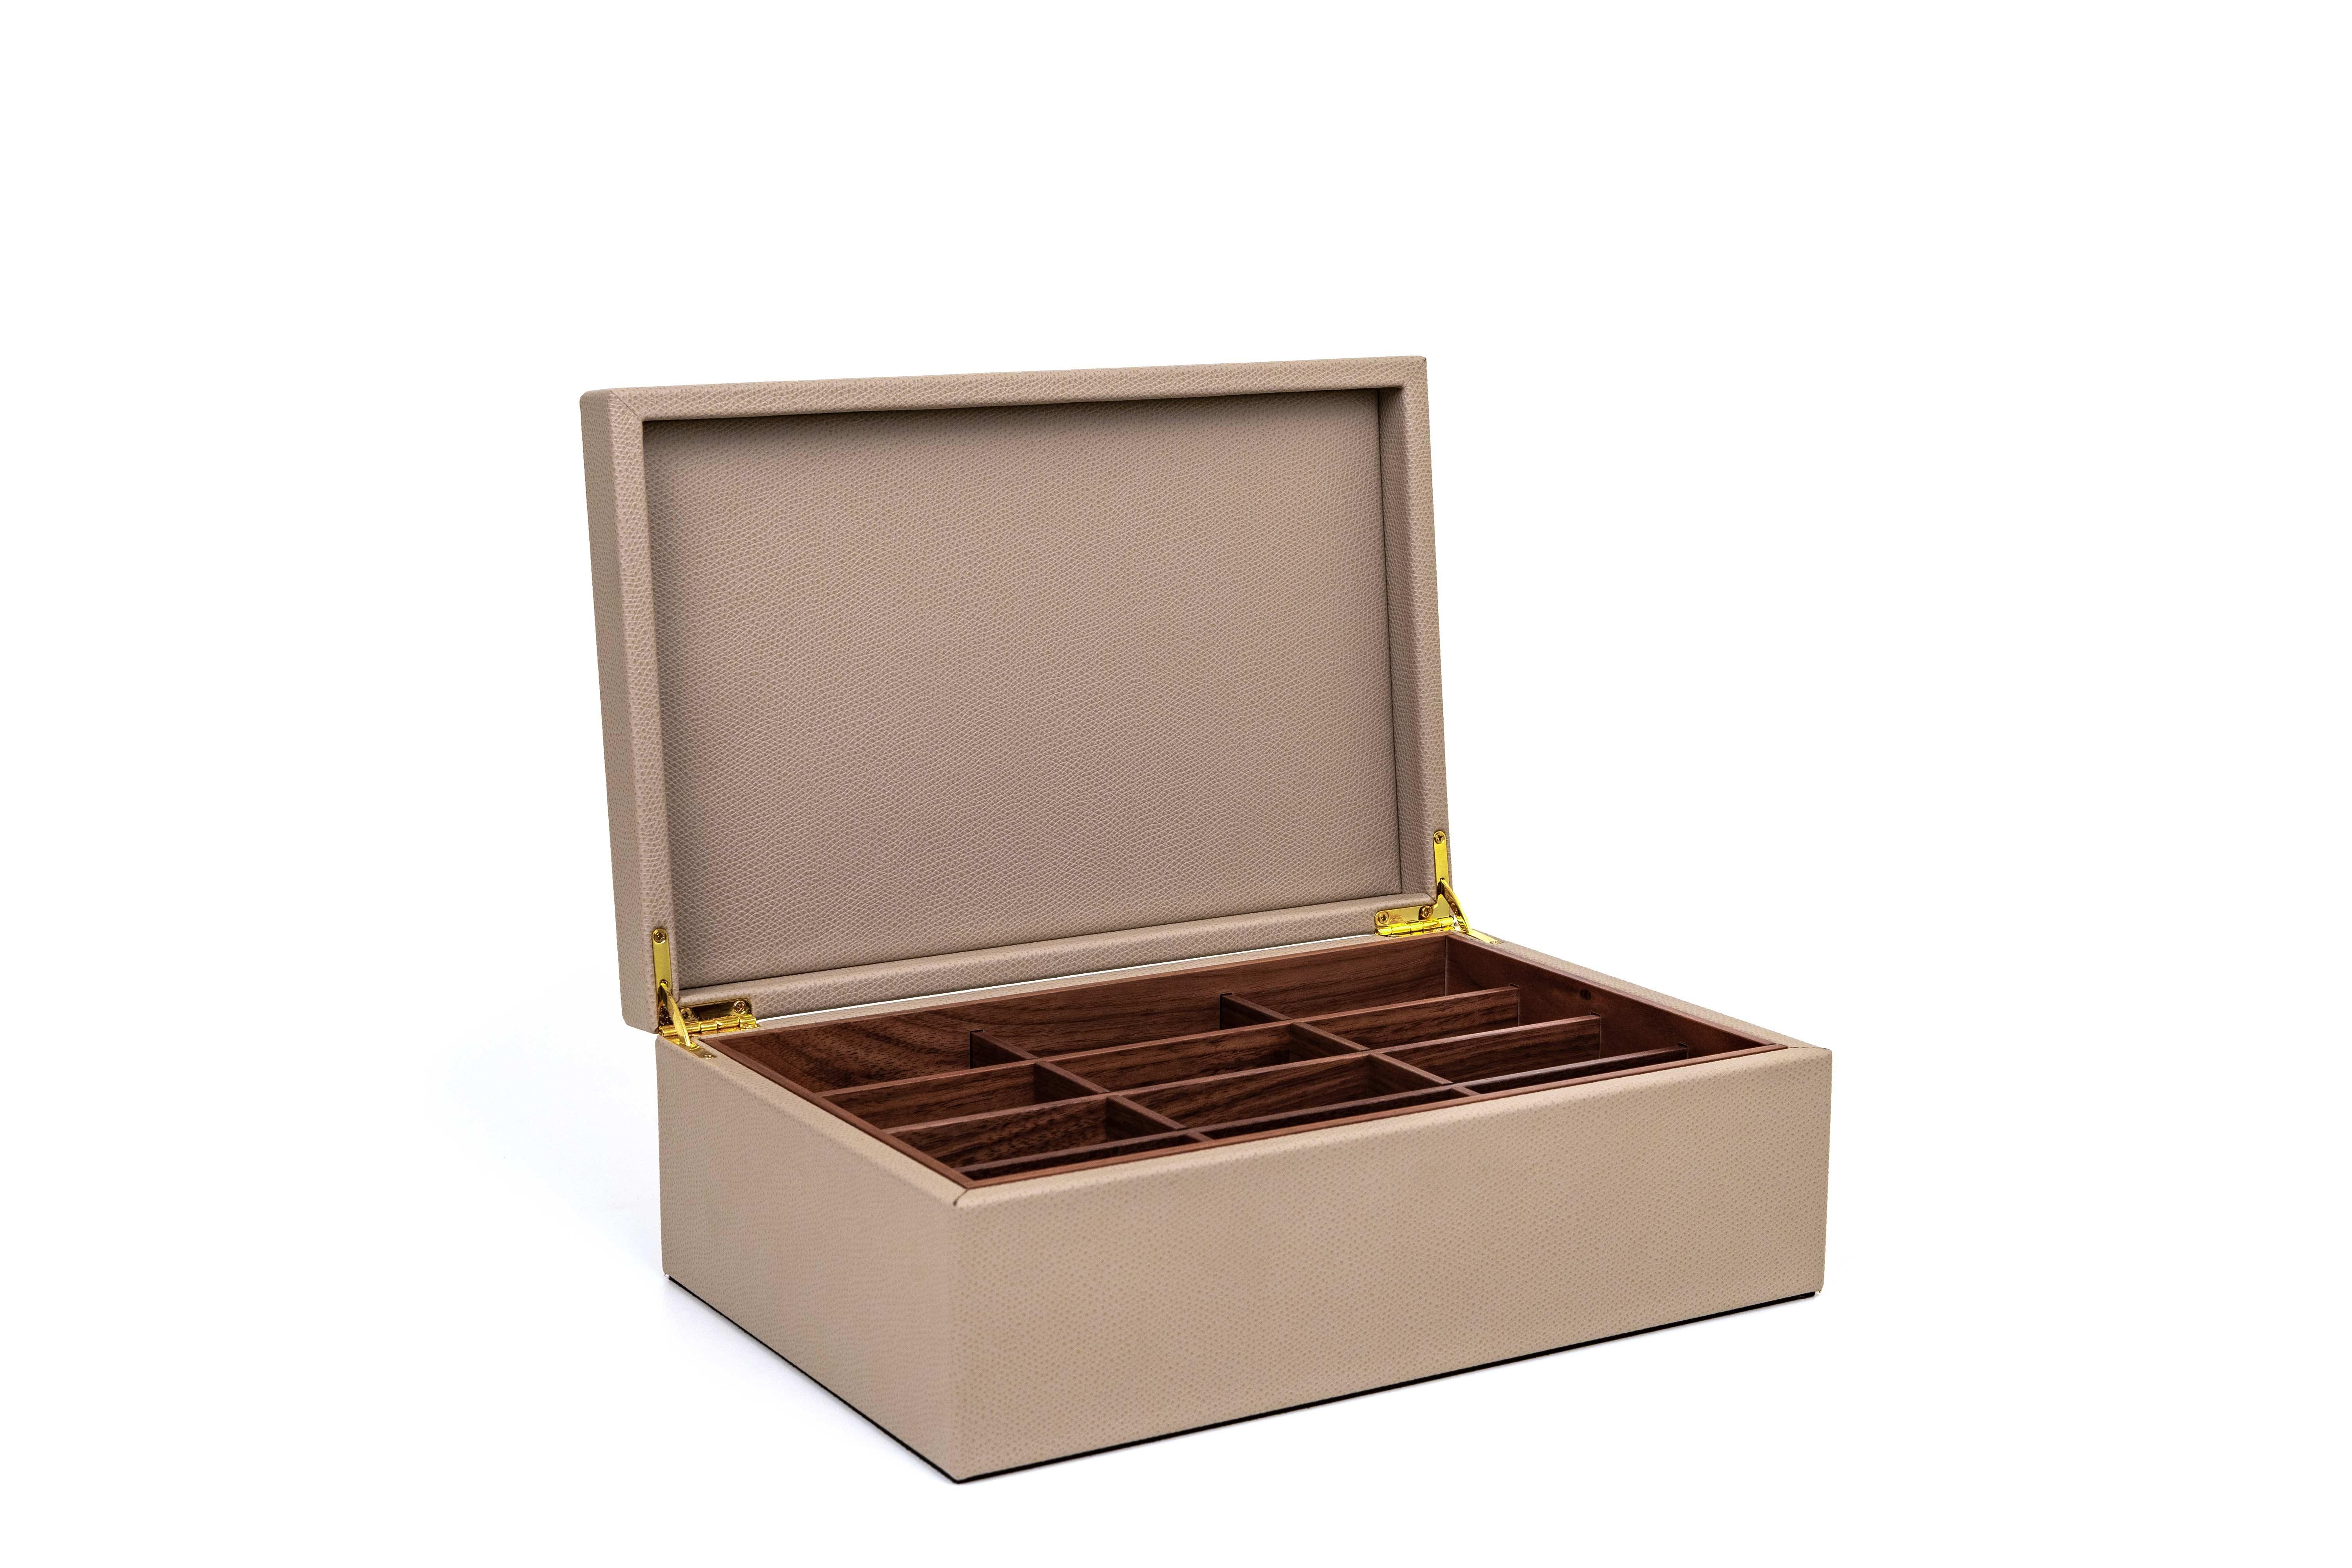 For true infusions' lovers.

Elevate your tea-drinking ritual with a wooden box covered outside with genuine calf leather. Its inner walnut wood structure is divided inside by compartments that feature twelve spaces to hold a variety of tea bags.